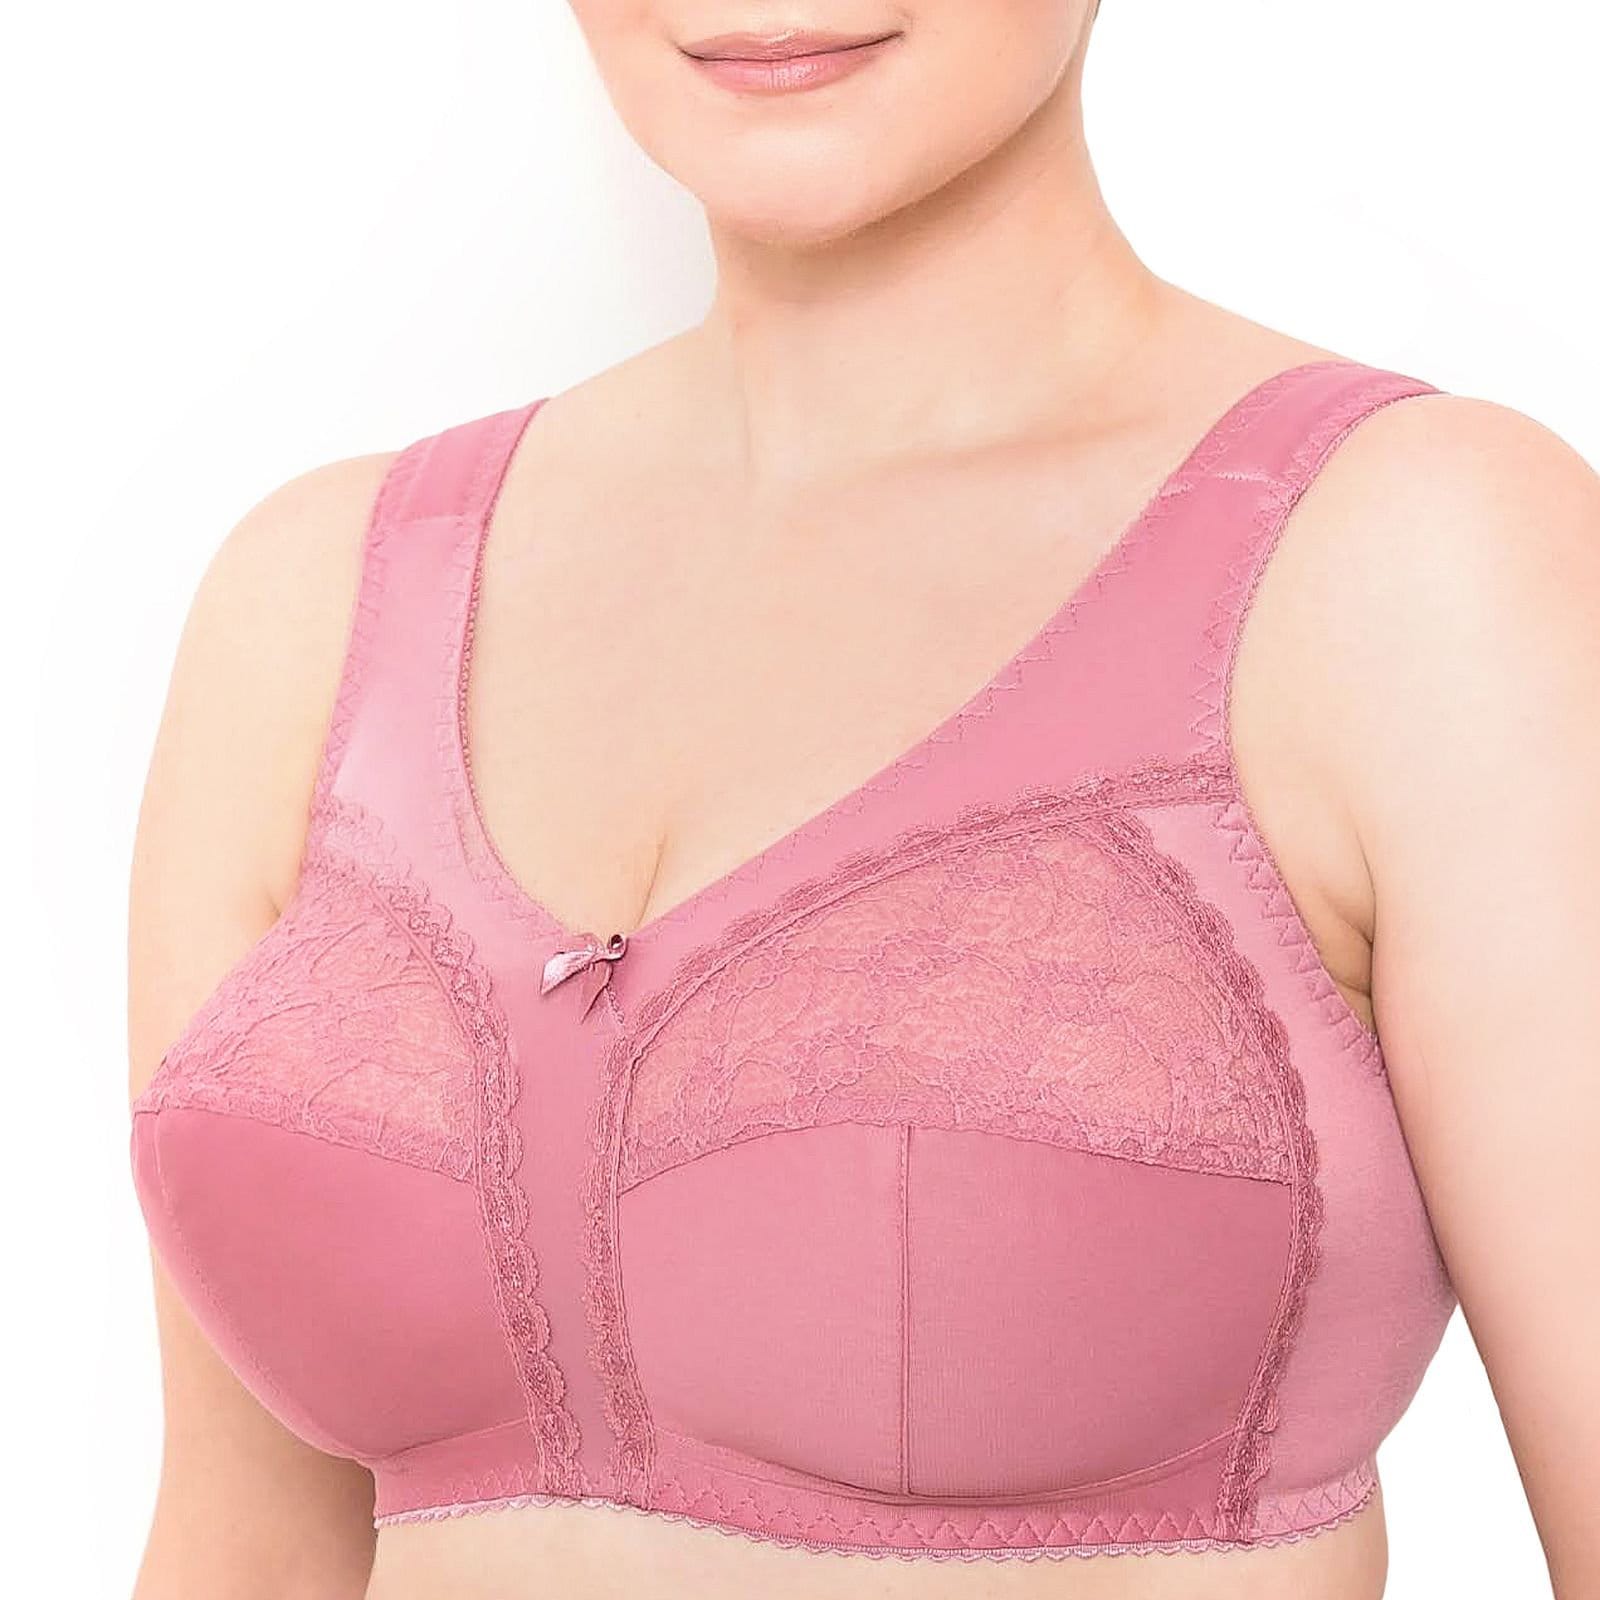 Wireless Plus Size Bra Minimizer Wide Straps Unlined Full Coverage 36 38 40  42 44 46 48 50 52/C D E F G H I J dusty Rose -  Hong Kong